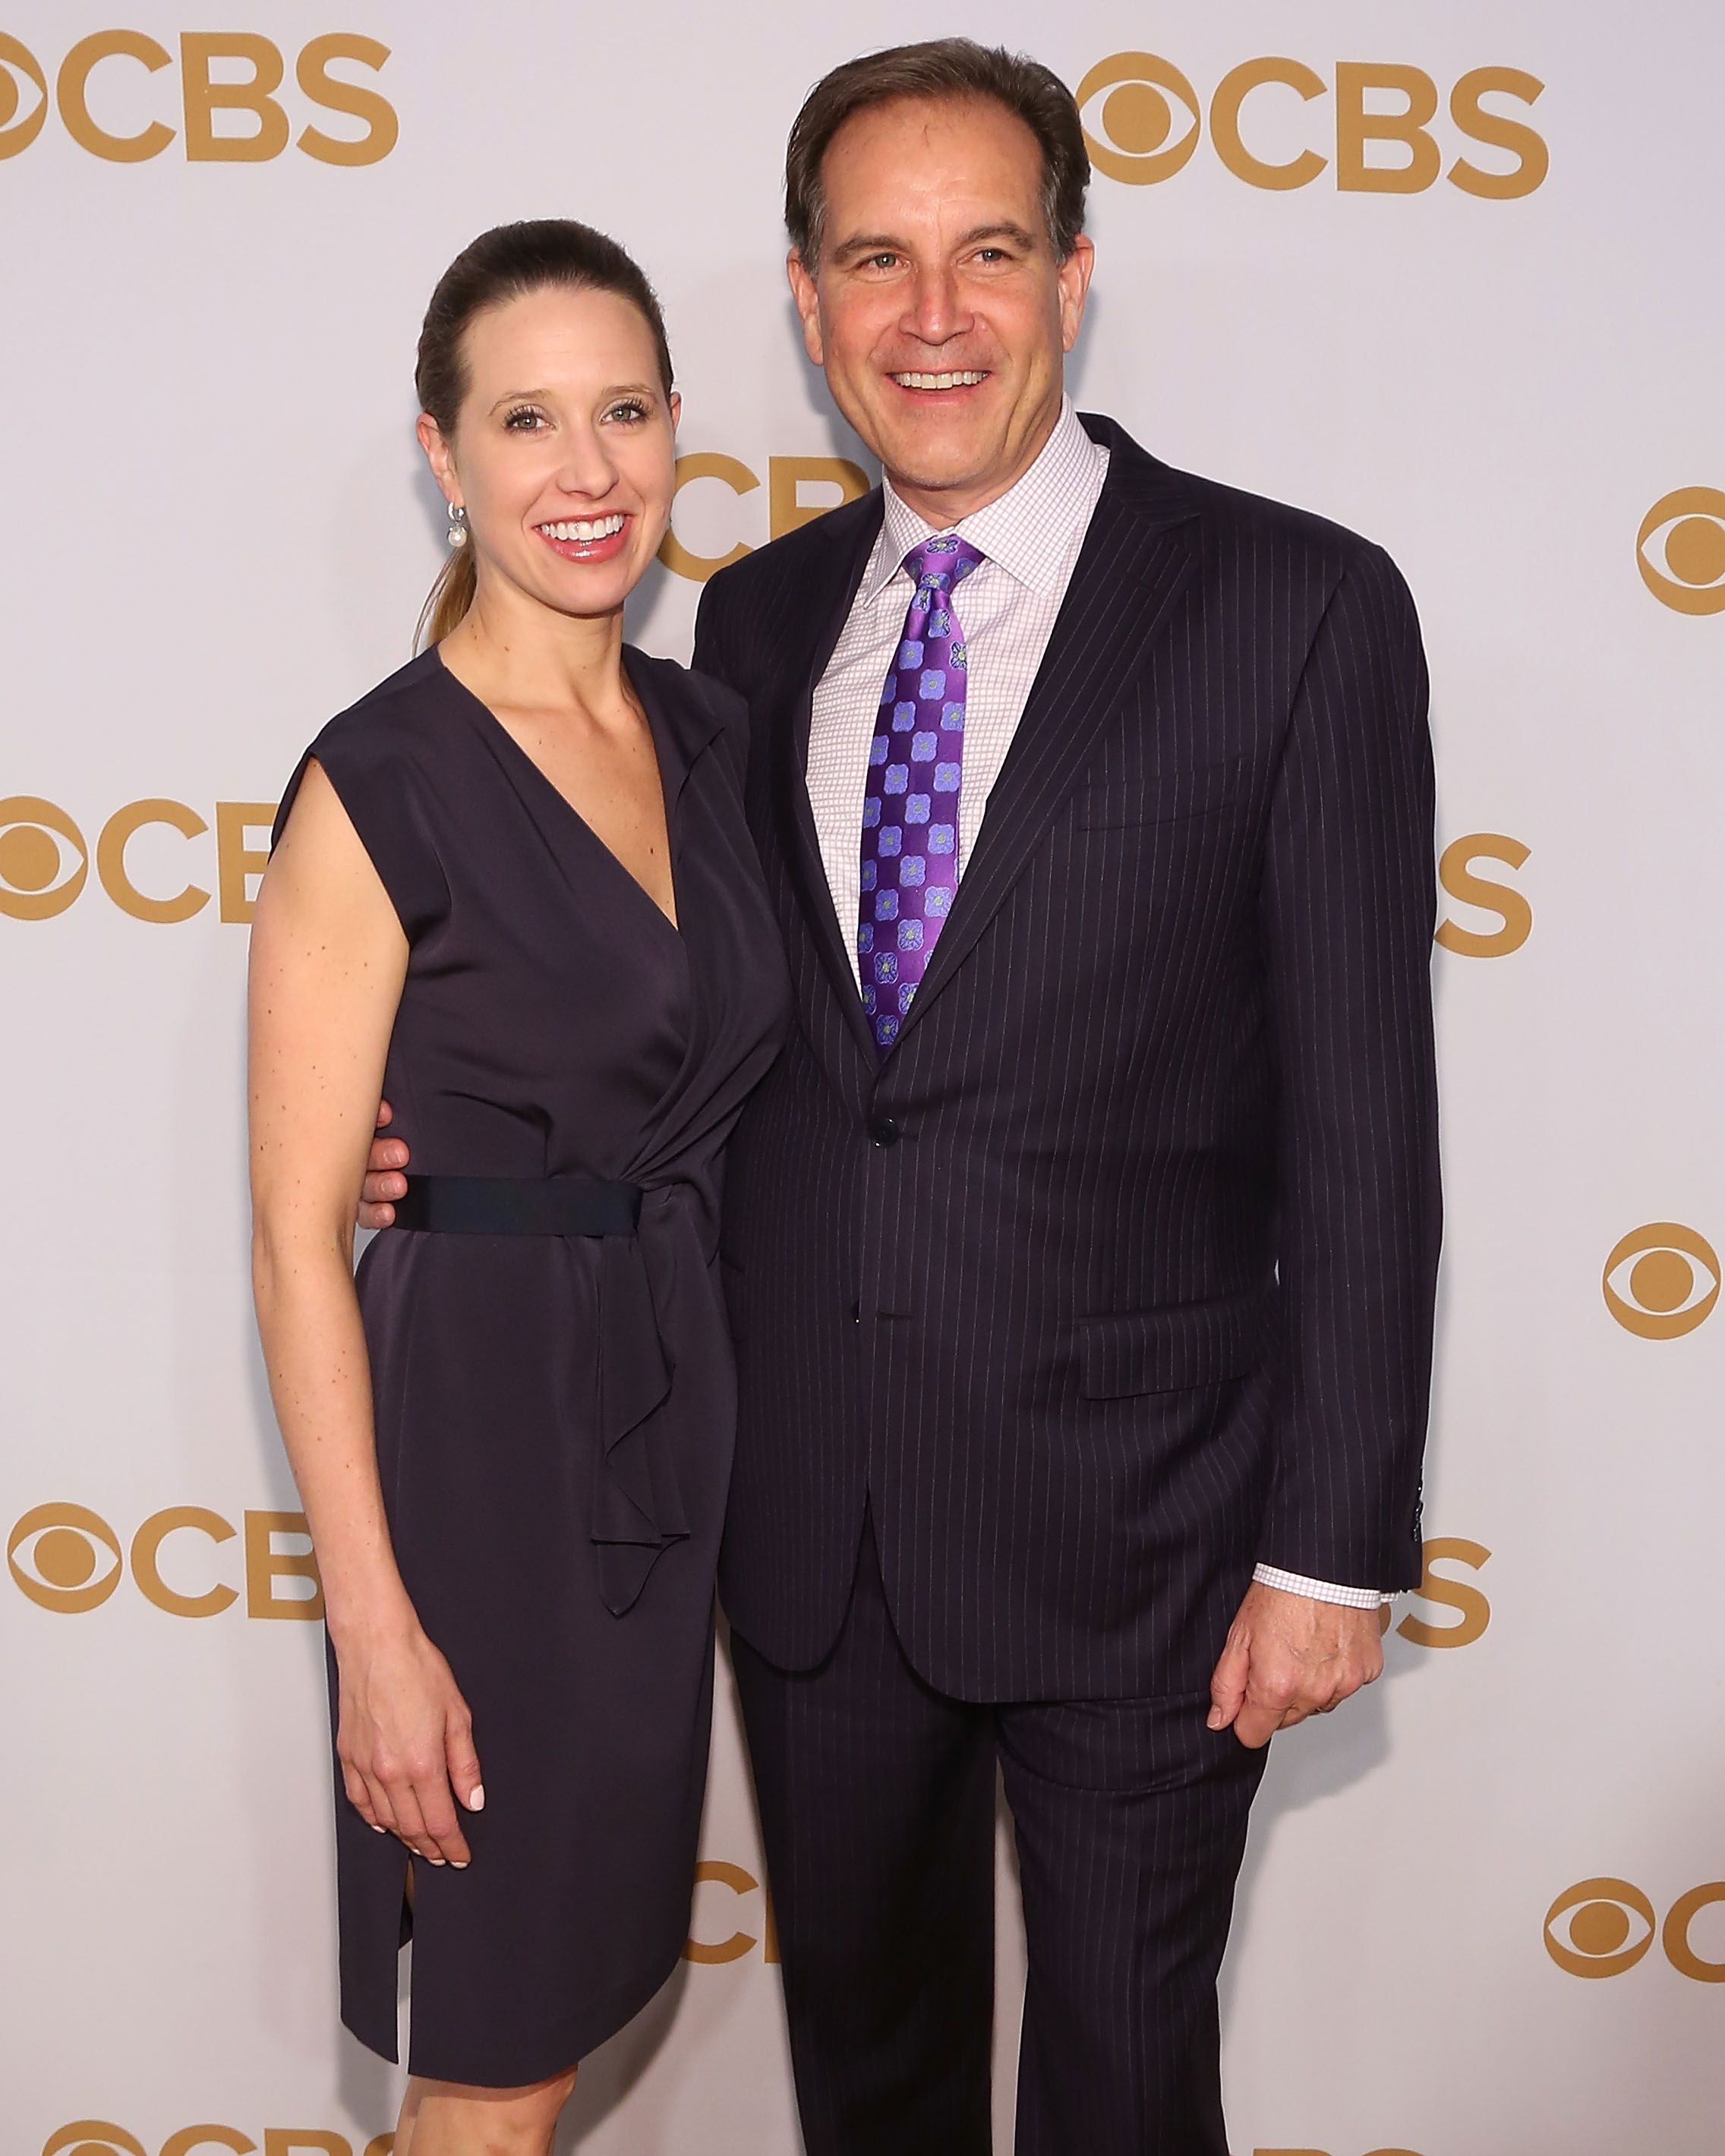 Courtney Richards and Jim Nantz during the 2015 CBS Upfront at The Tent at Lincoln Center on May 13, 2015, in New York City. | Source: Getty Images